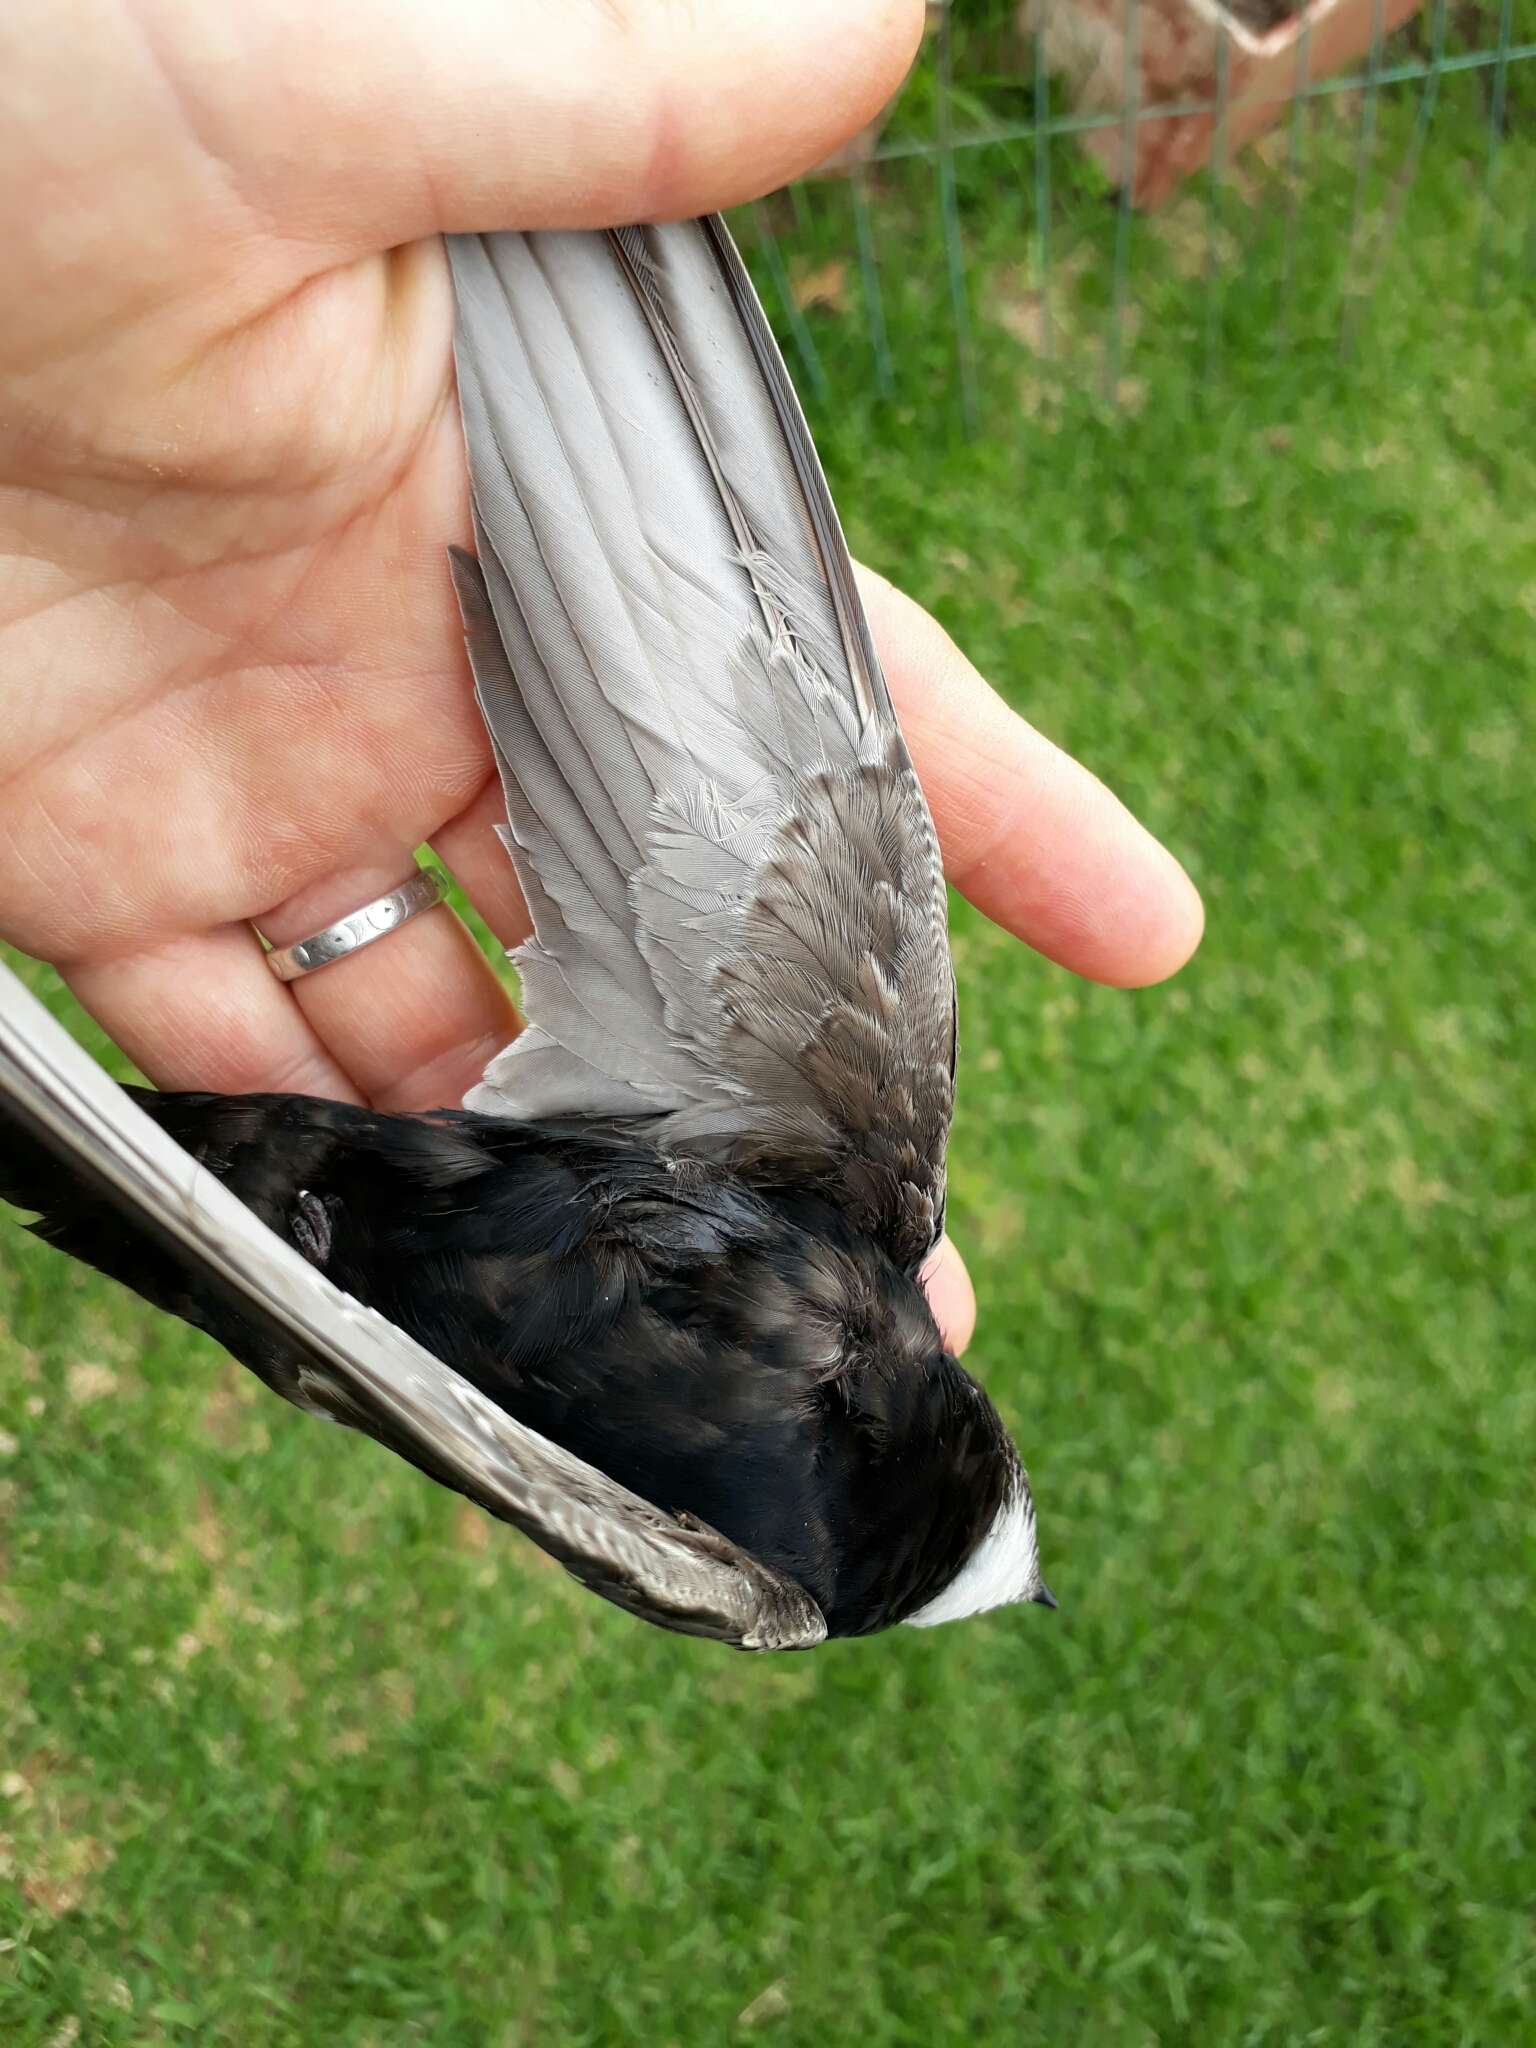 Image of African White-rumped Swift